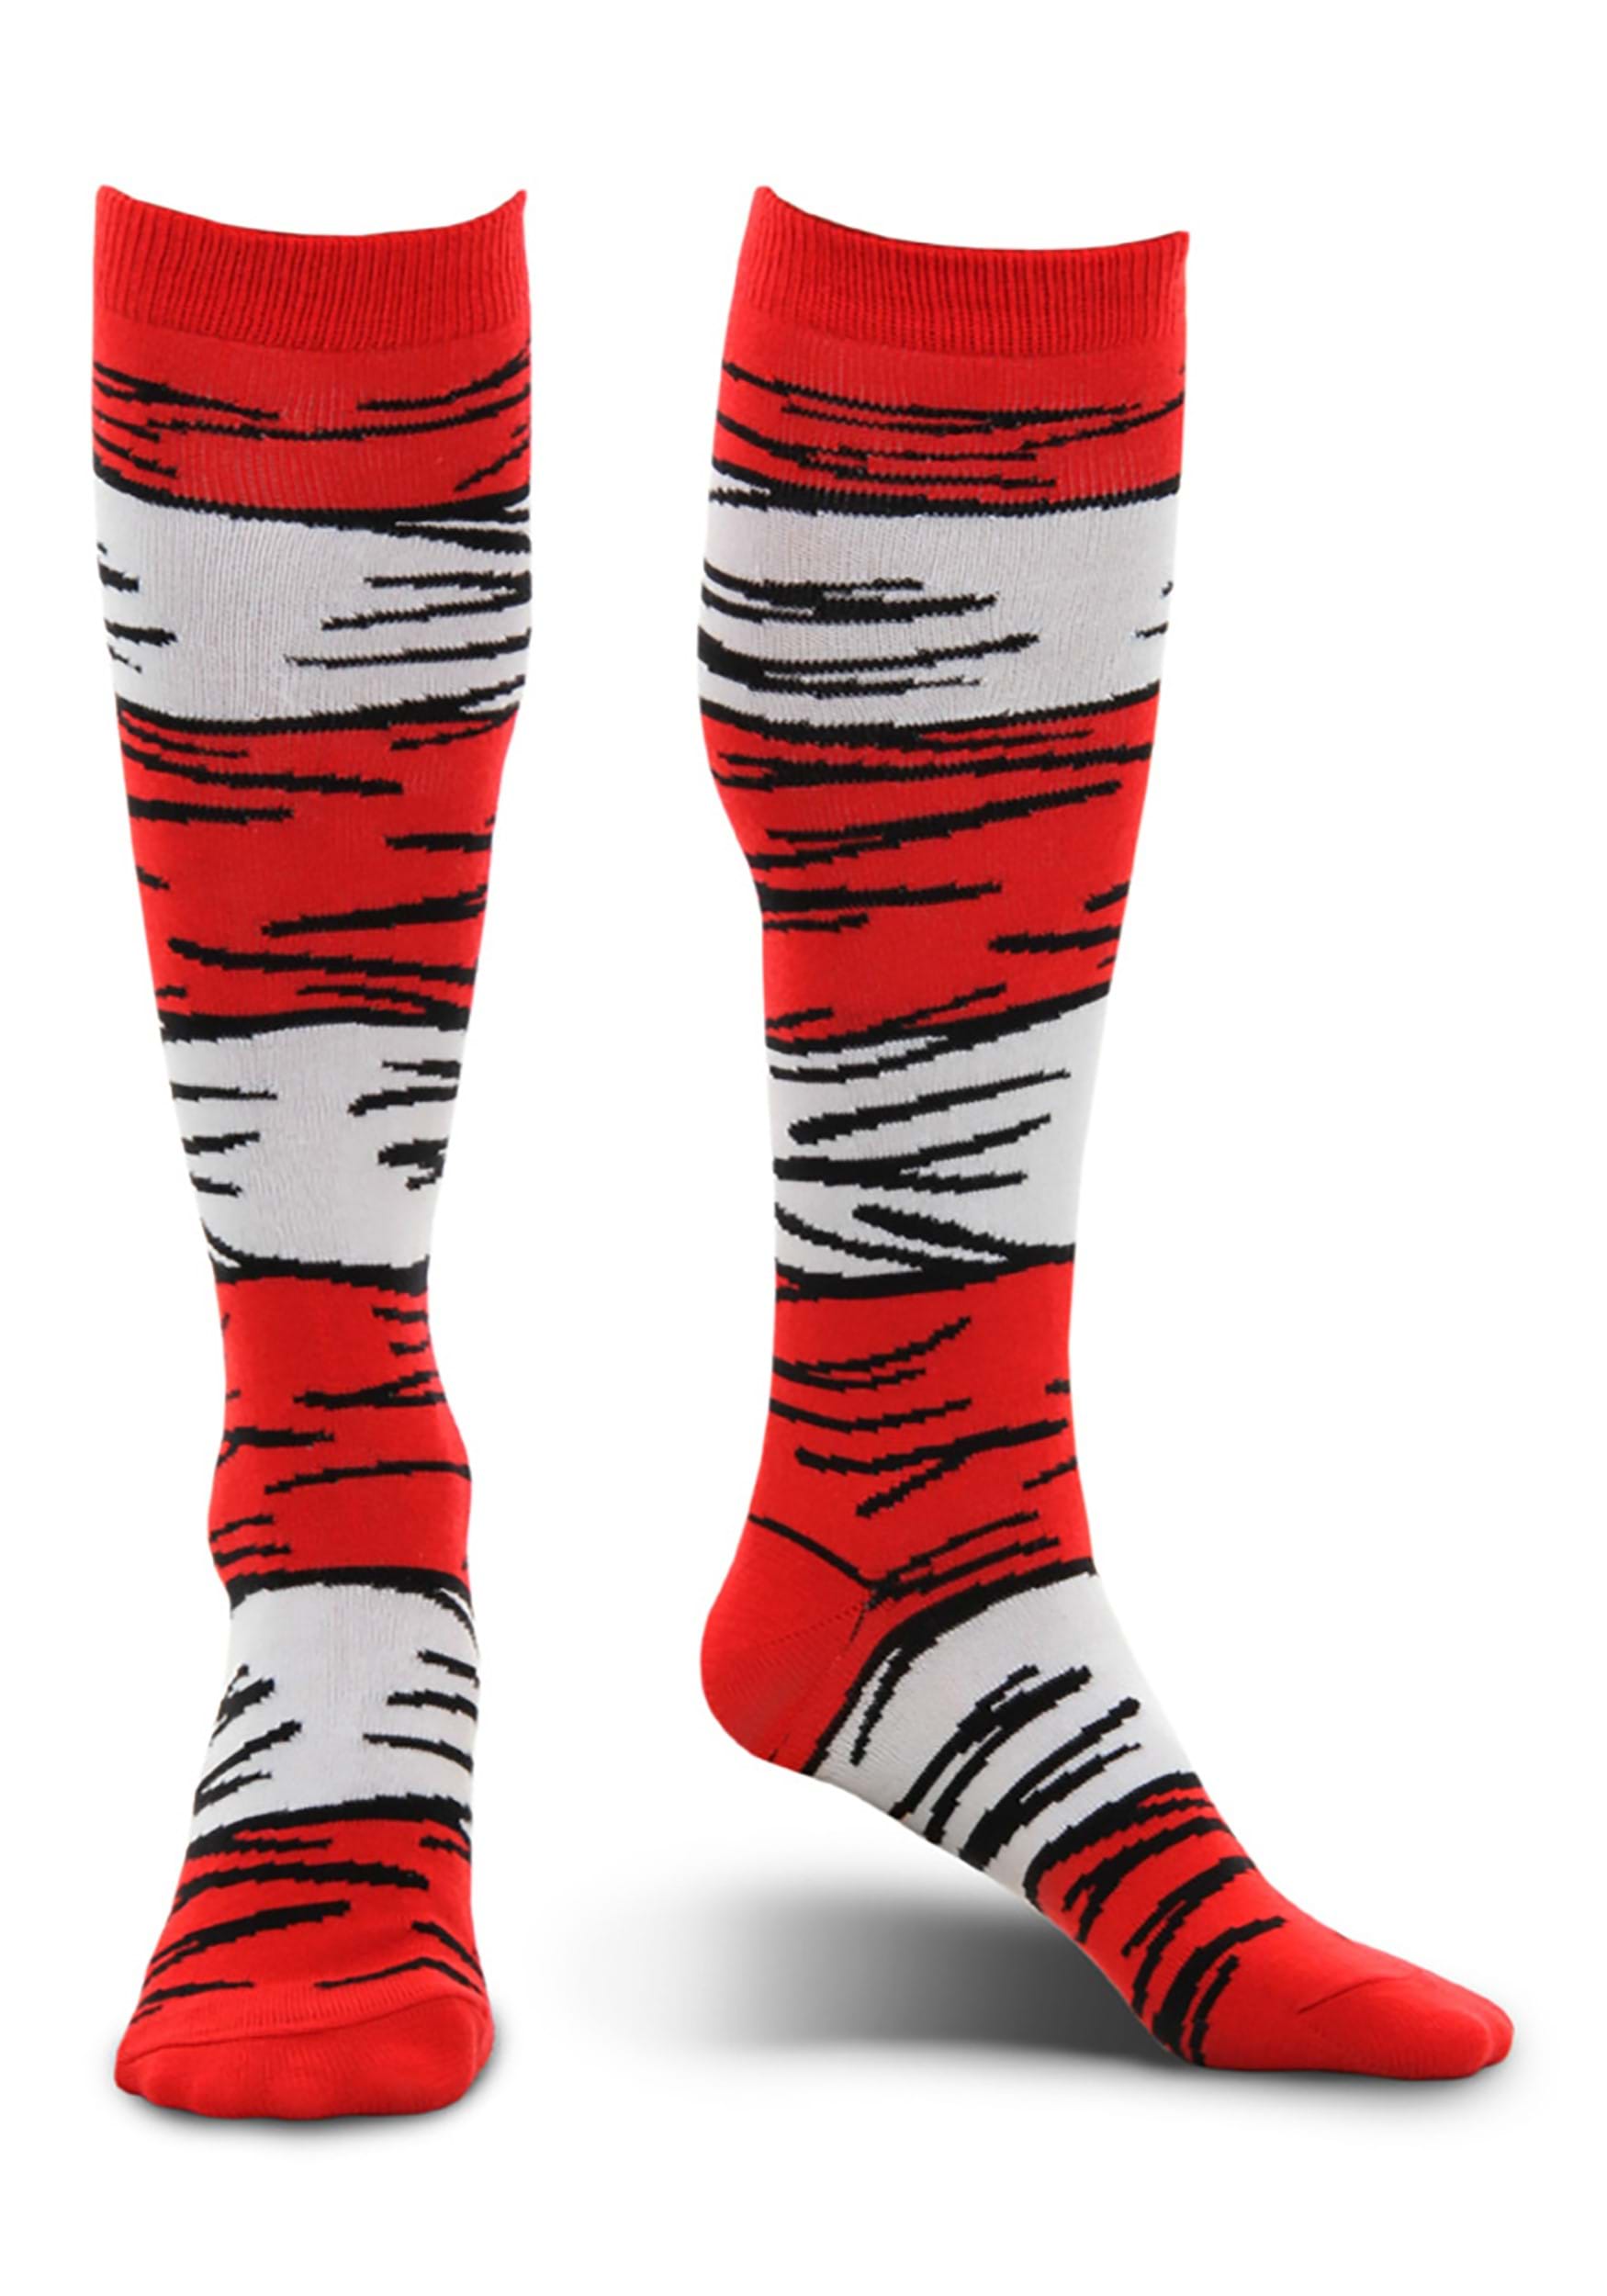 Adult The Cat in the Hat Costume Socks